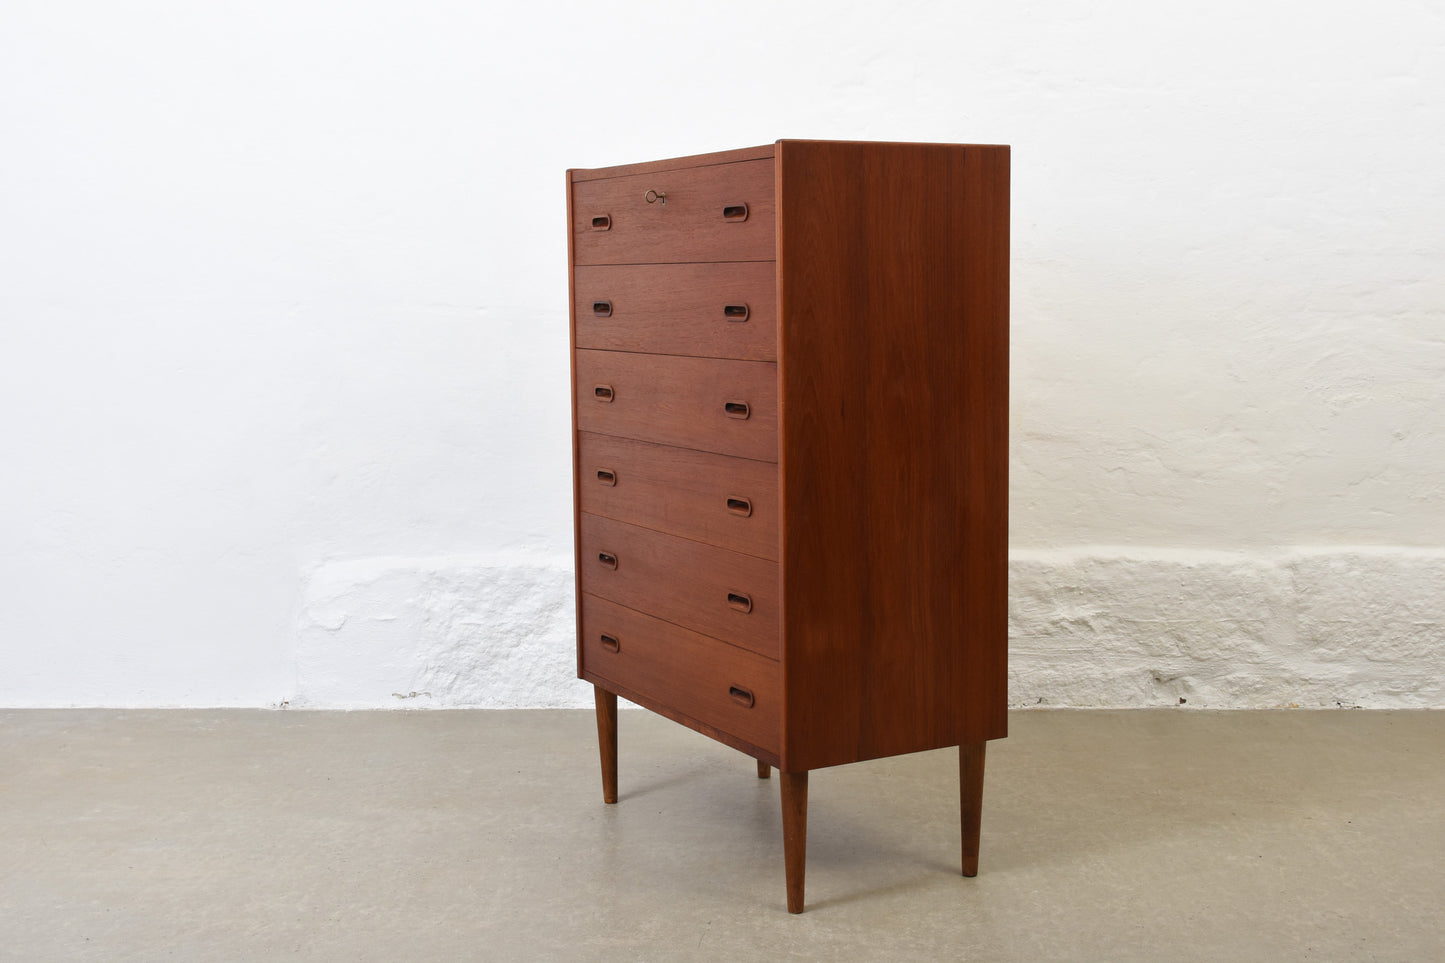 1960s teak chest with inset handles no. 2